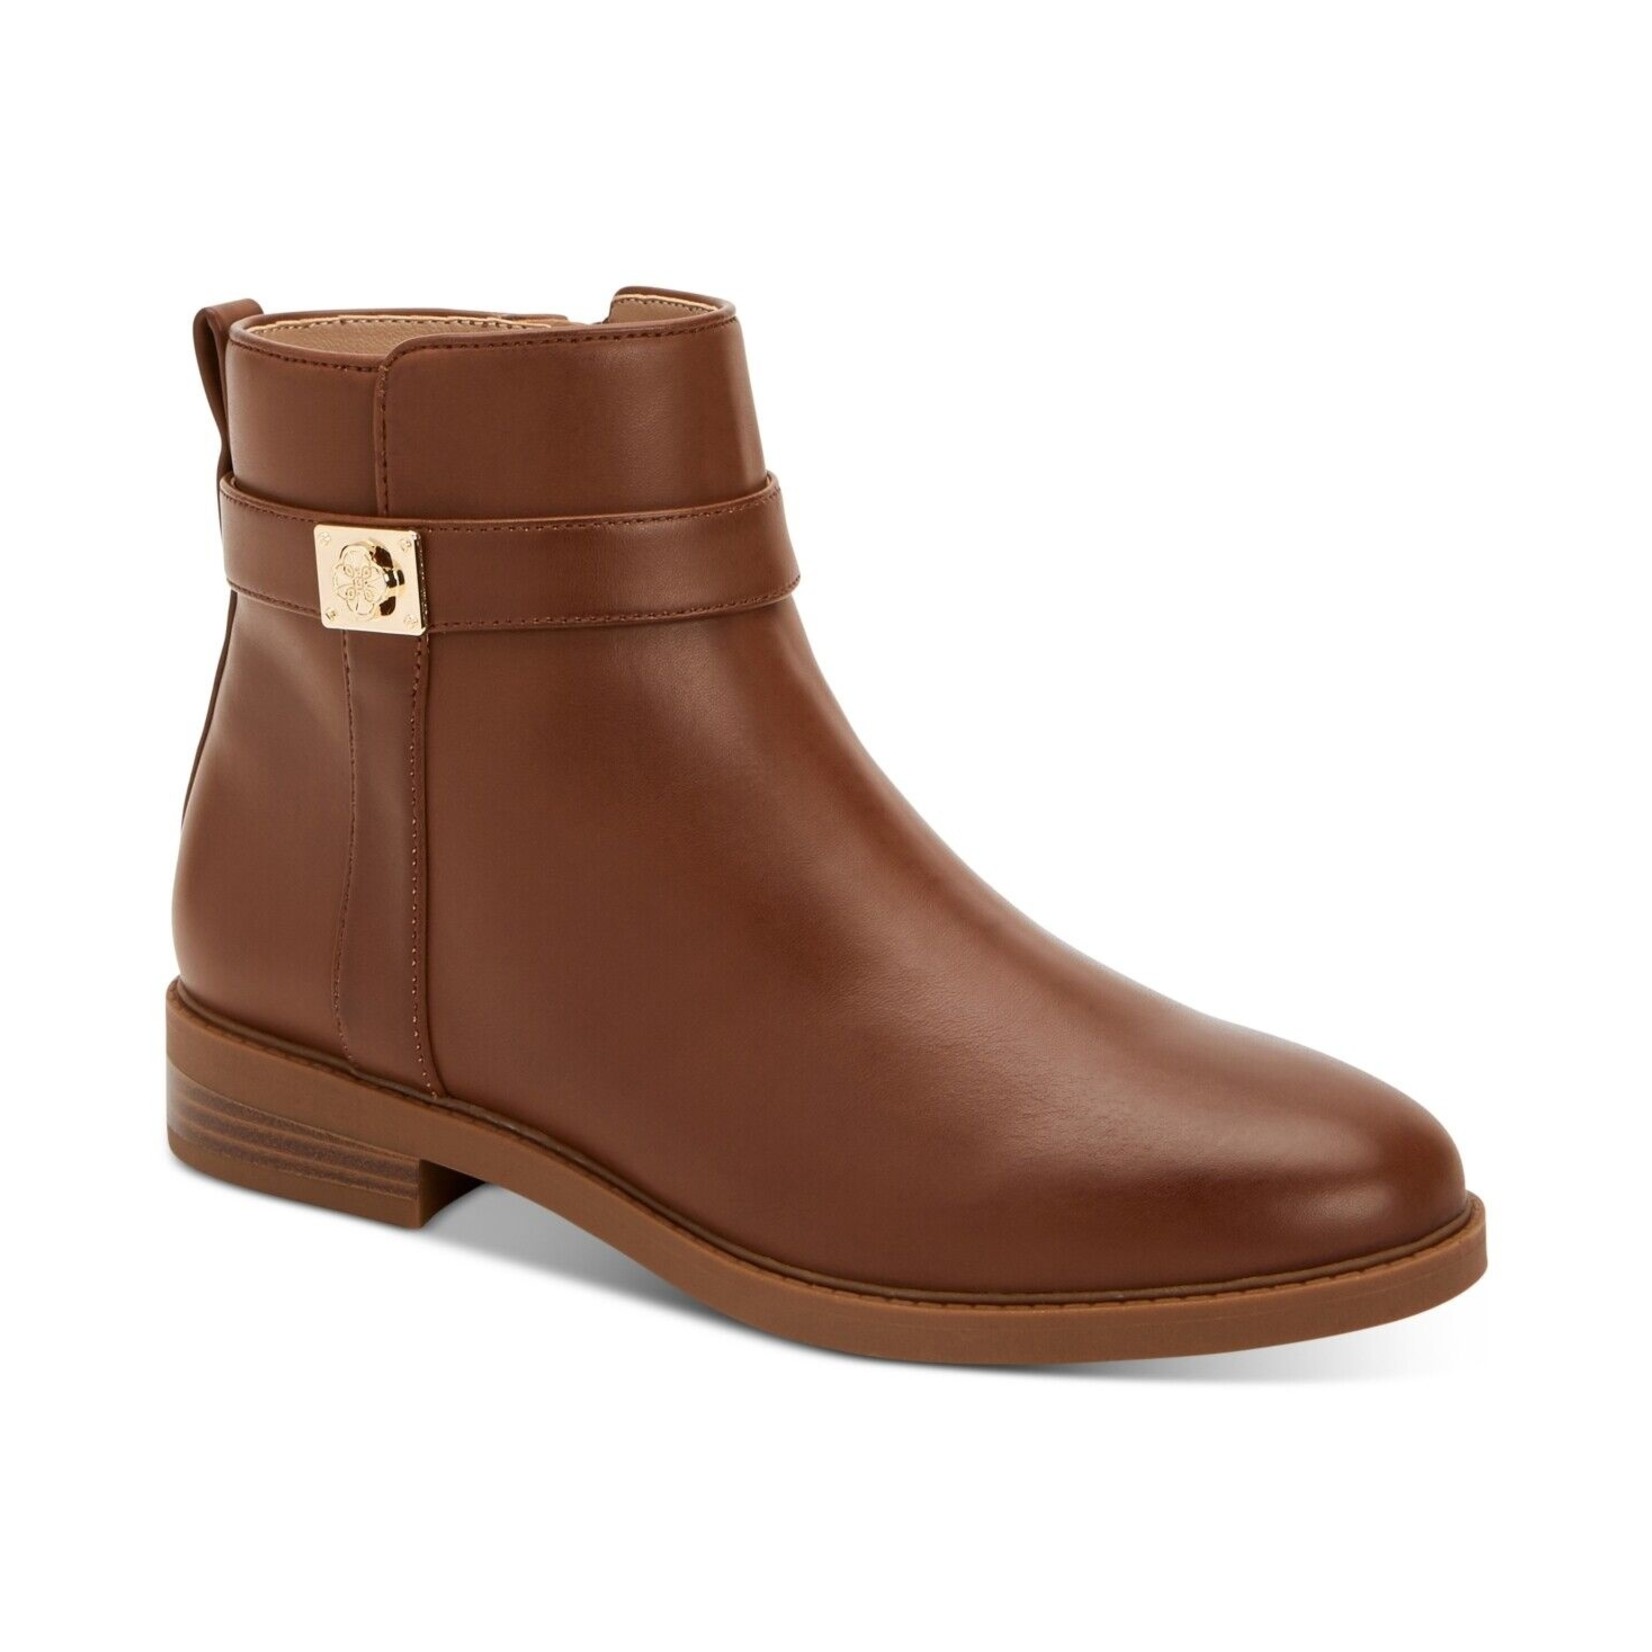 Charter Club Charter Club Women's Cognac Ankle Boots